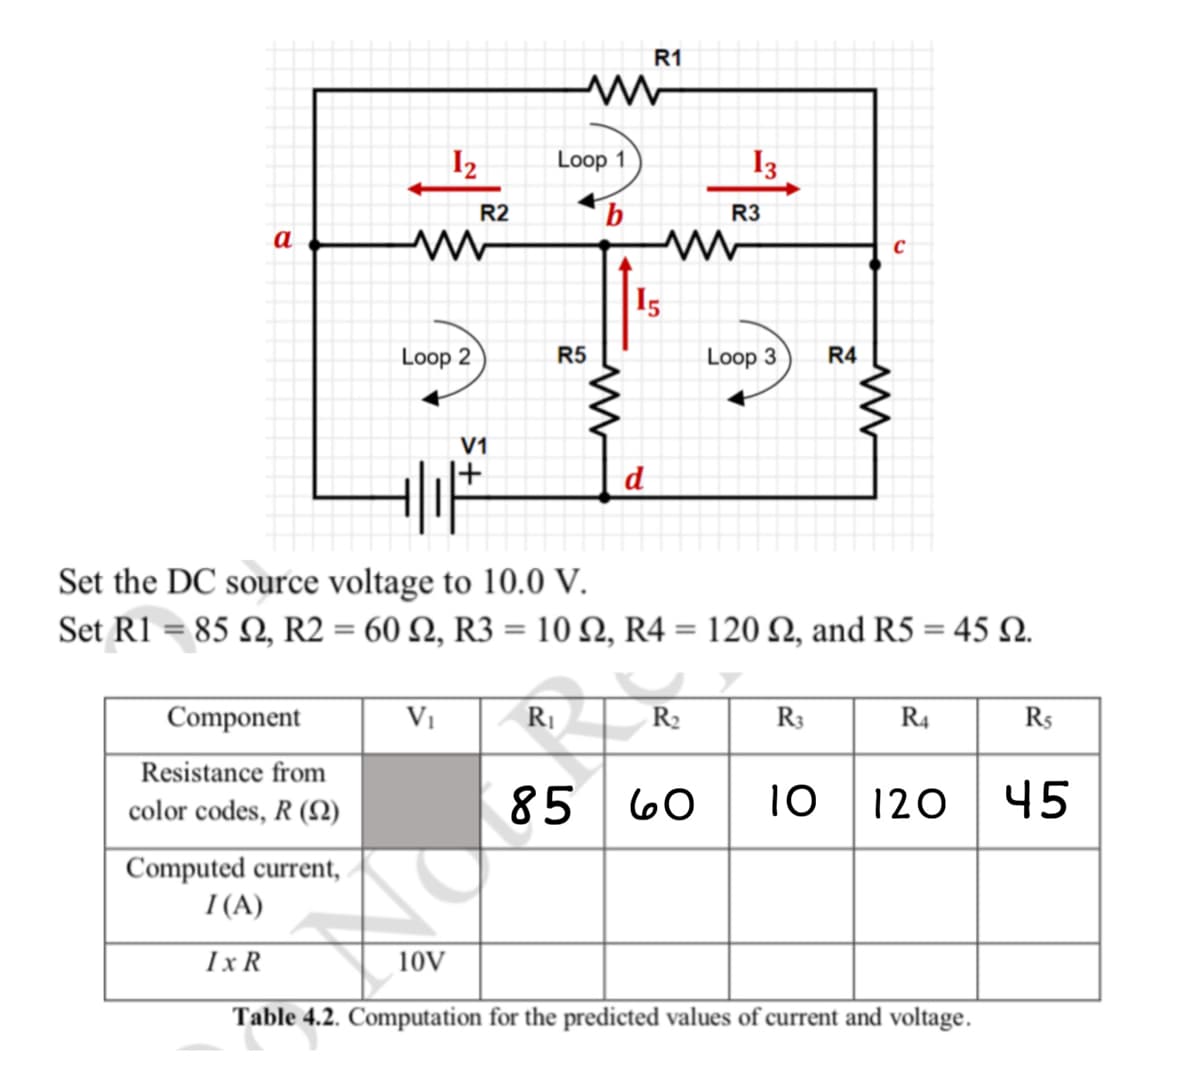 R1
I2
Loop 1
I3
R2
R3
a
|I5
Loop 2
R5
Loop 3
R4
V1
Set the DC source voltage to 10.0 V.
Set RI = 85 N, R2 = 60 N, R3 = 10 N, R4 = 120 N, and R5 = 45 N.
Component
Vi
RI
R2
R3
R4
Rs
Resistance from
color codes, R (2)
85
60| 10
120
45
Computed current,
I (A)
Ix R
10V
Table 4.2. Computation for the predicted values of current and voltage.
